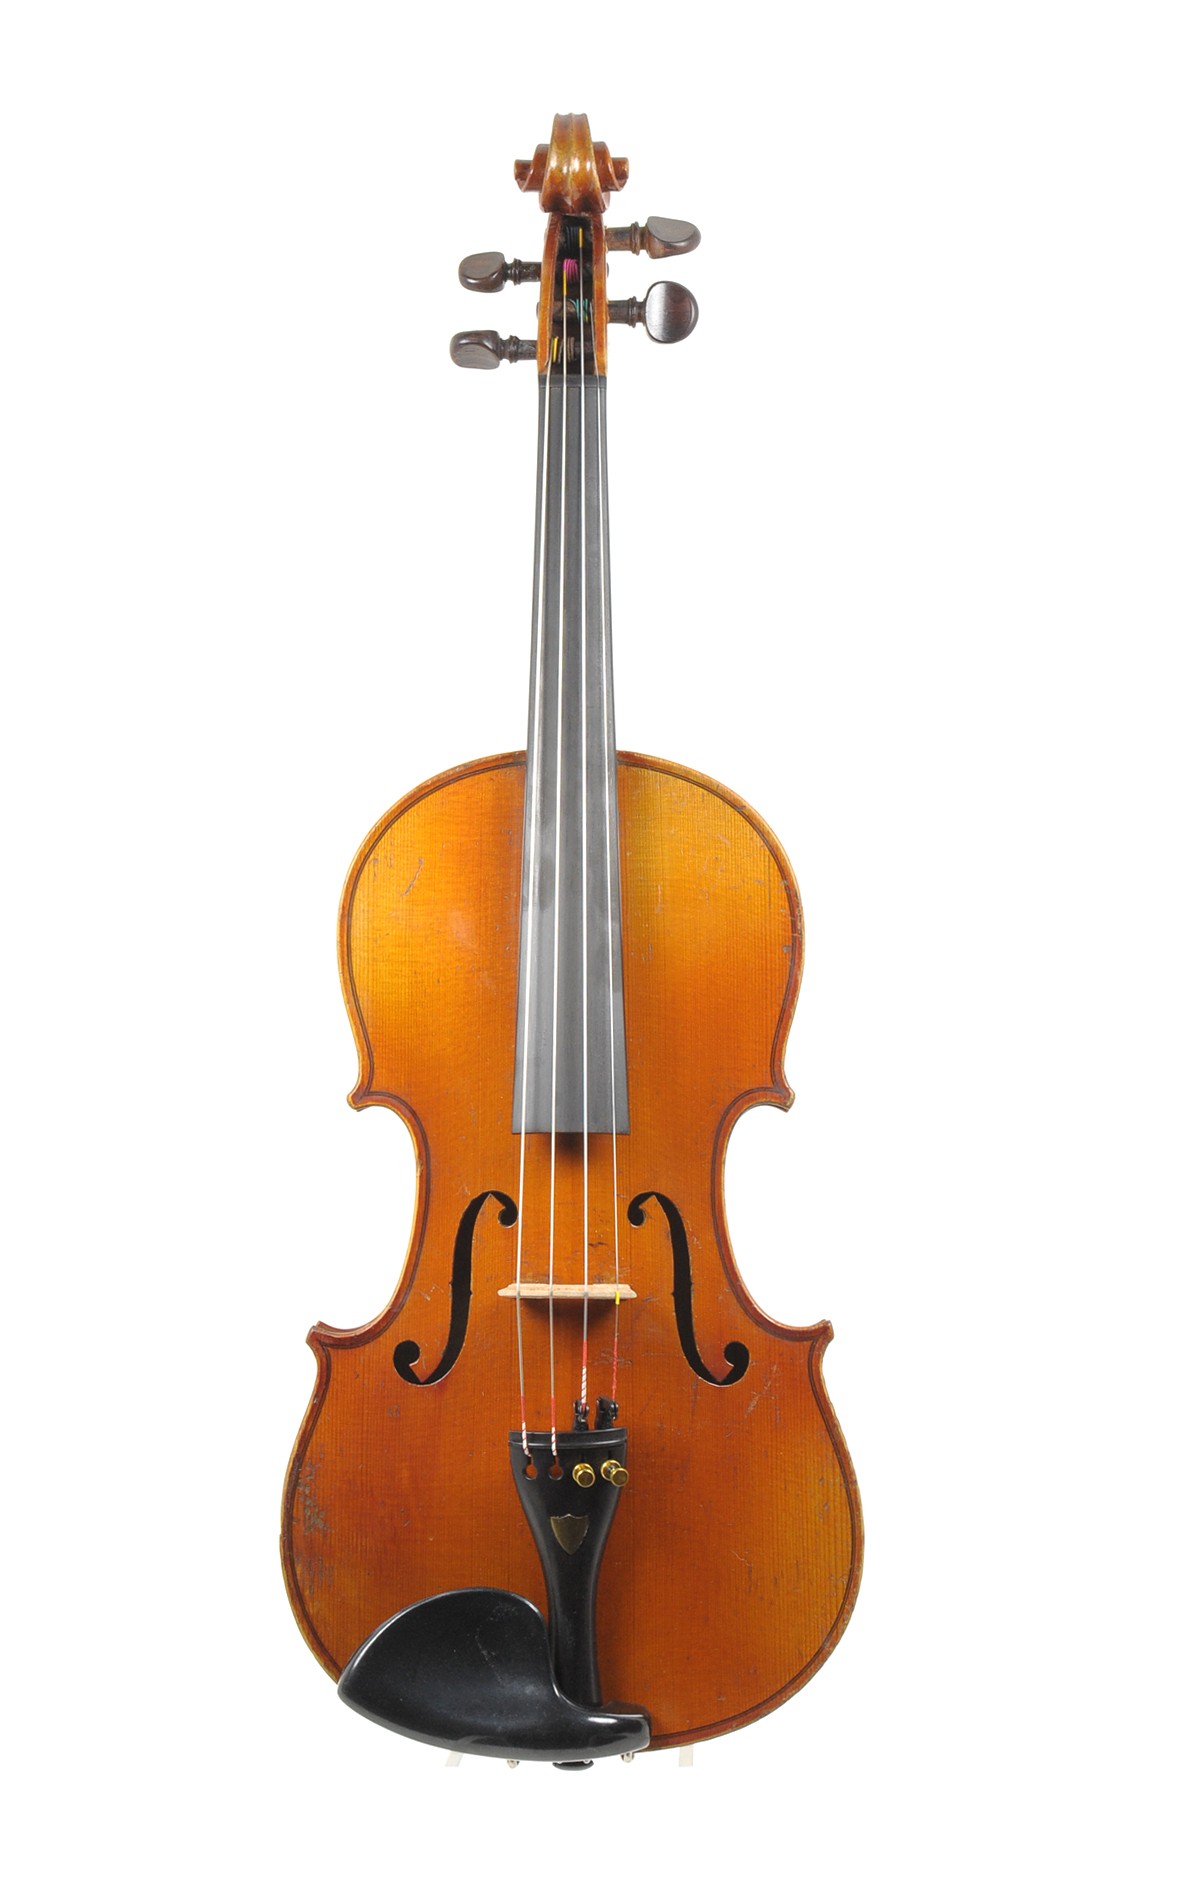 Old French 3/4 sized violin, after Stradivari  - top